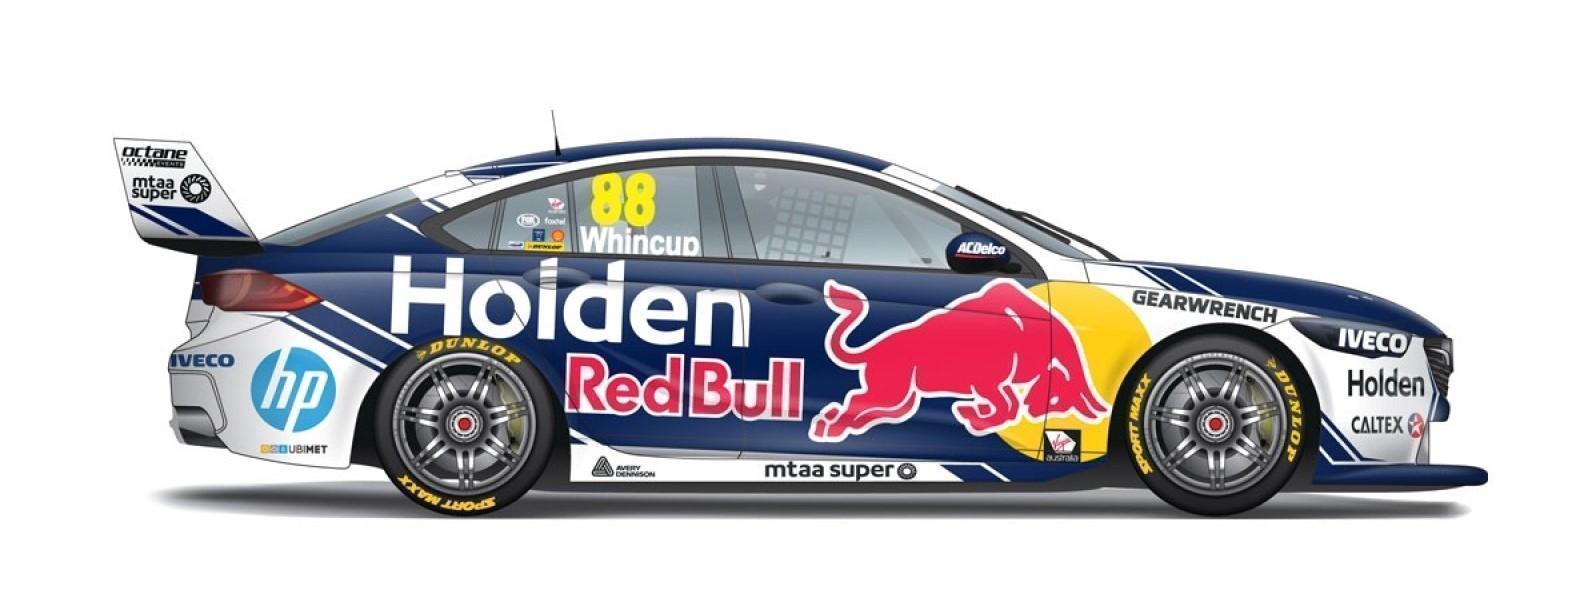 PRE ORDER - 2020 #88 Jamie Whincup Red Bull Holden Racing Team Season Car Holden ZB Commodore 1:18 Scale Model Car (FULL PRICE - $179.00)